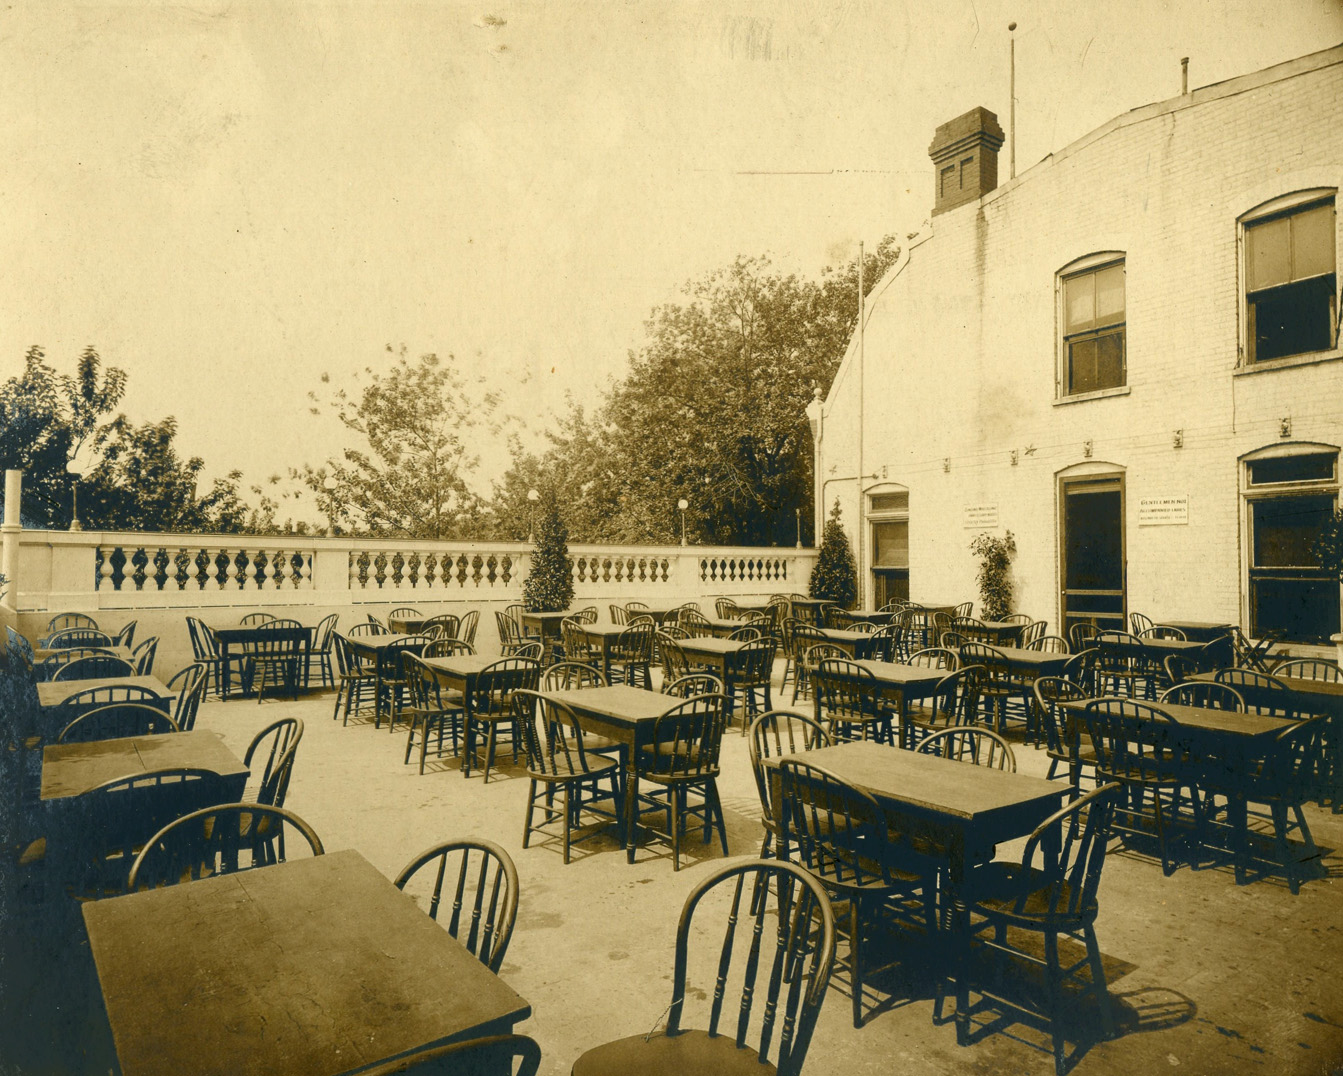 Rooftop garden of Fred Geyer's beer garden after it was purchased from George Kozel. 1827 14th St. NW, Washington D.C. probably about 1904-1908. View full size.